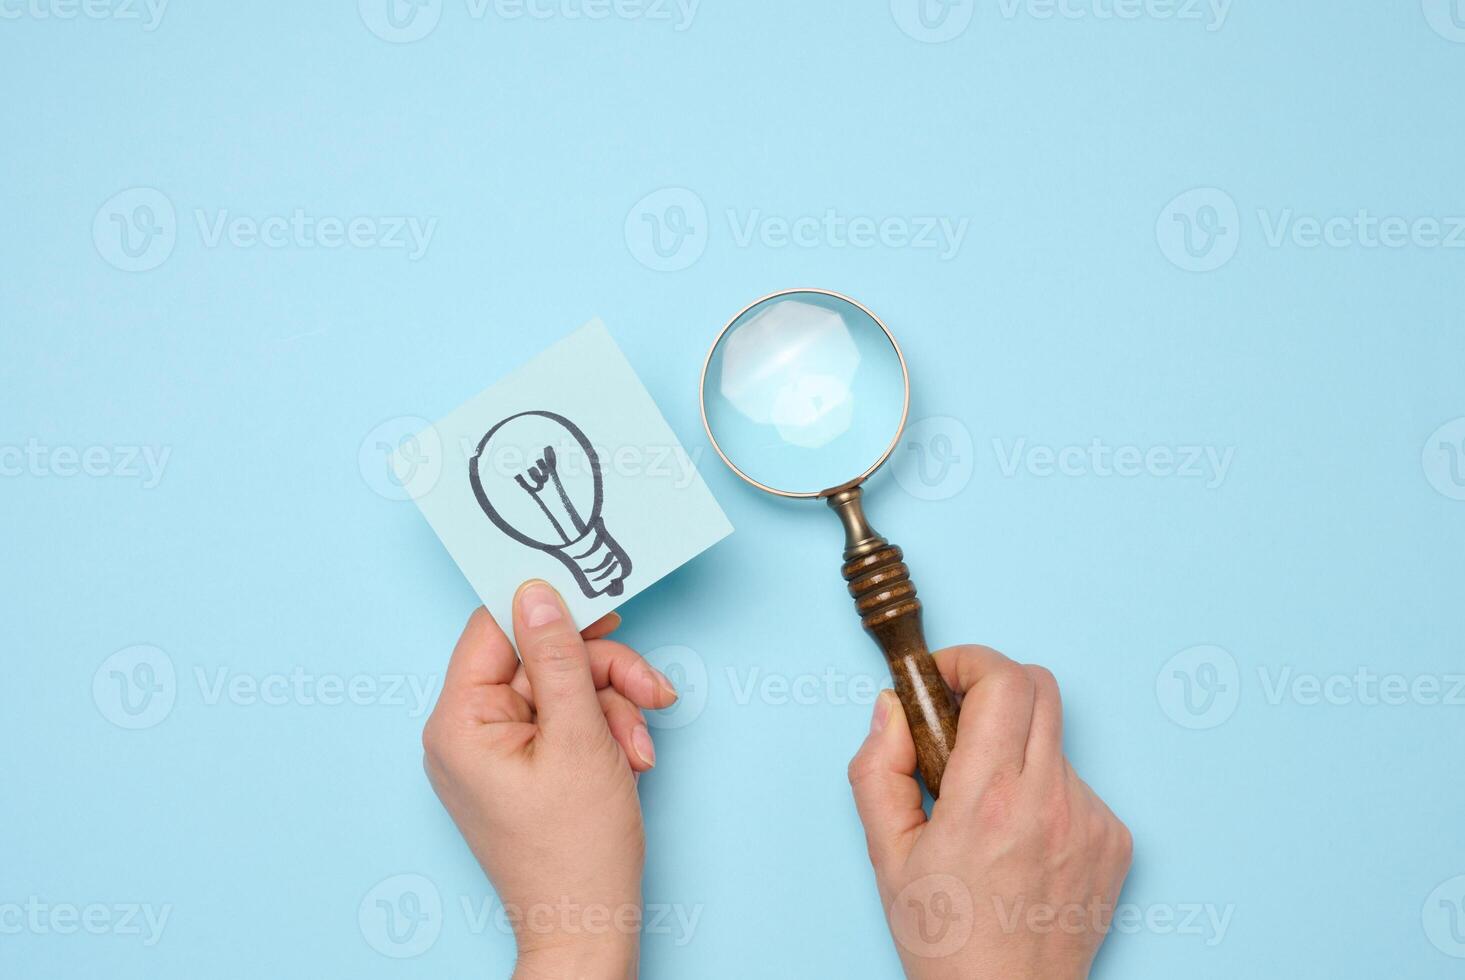 Drawn electric lamps on stickers, concept of searching for new ideas, brainstorming. photo